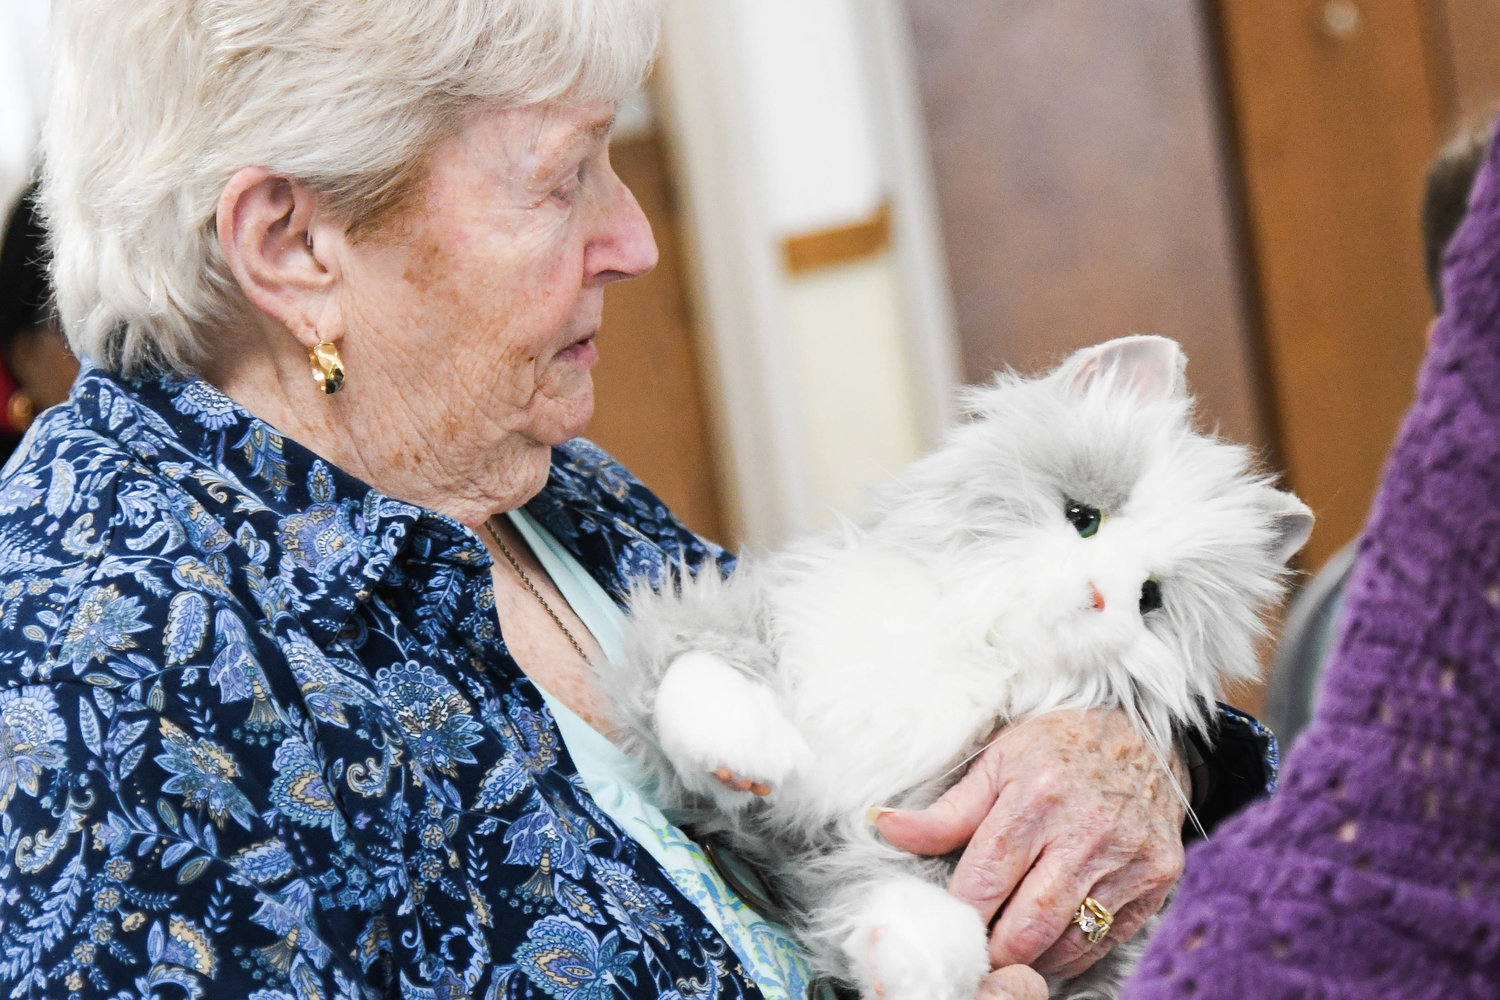 A member of the North Utica Senior Citizens Community Center holds an animatronic cat.